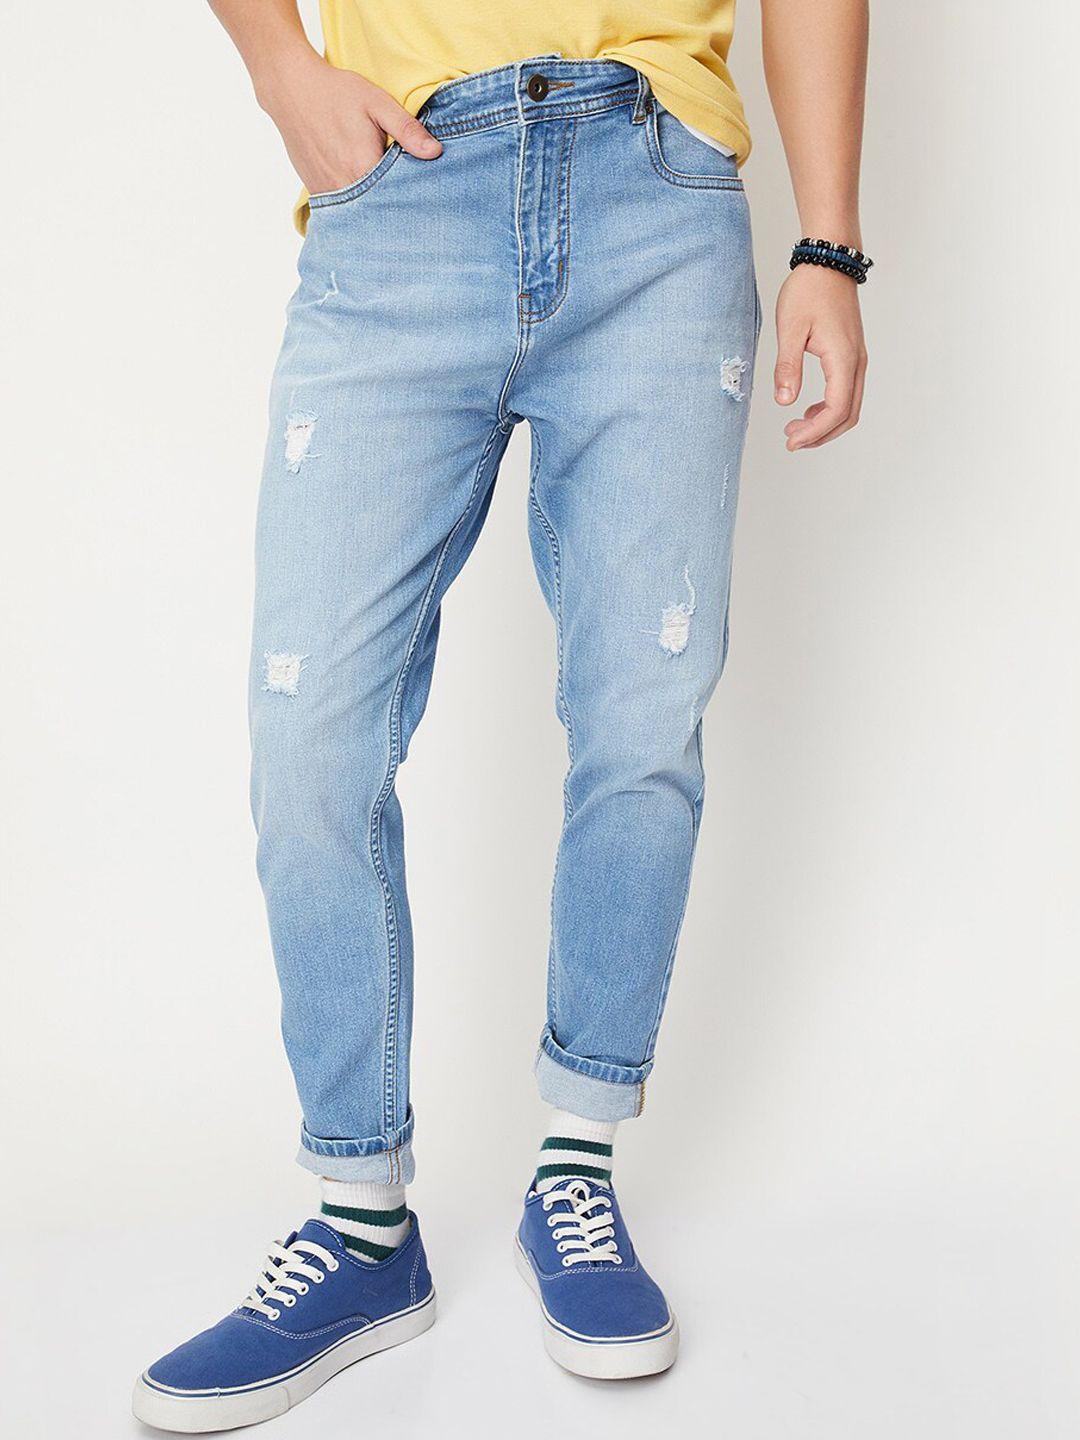 max-men-mildly-distressed-heavy-fade-jeans